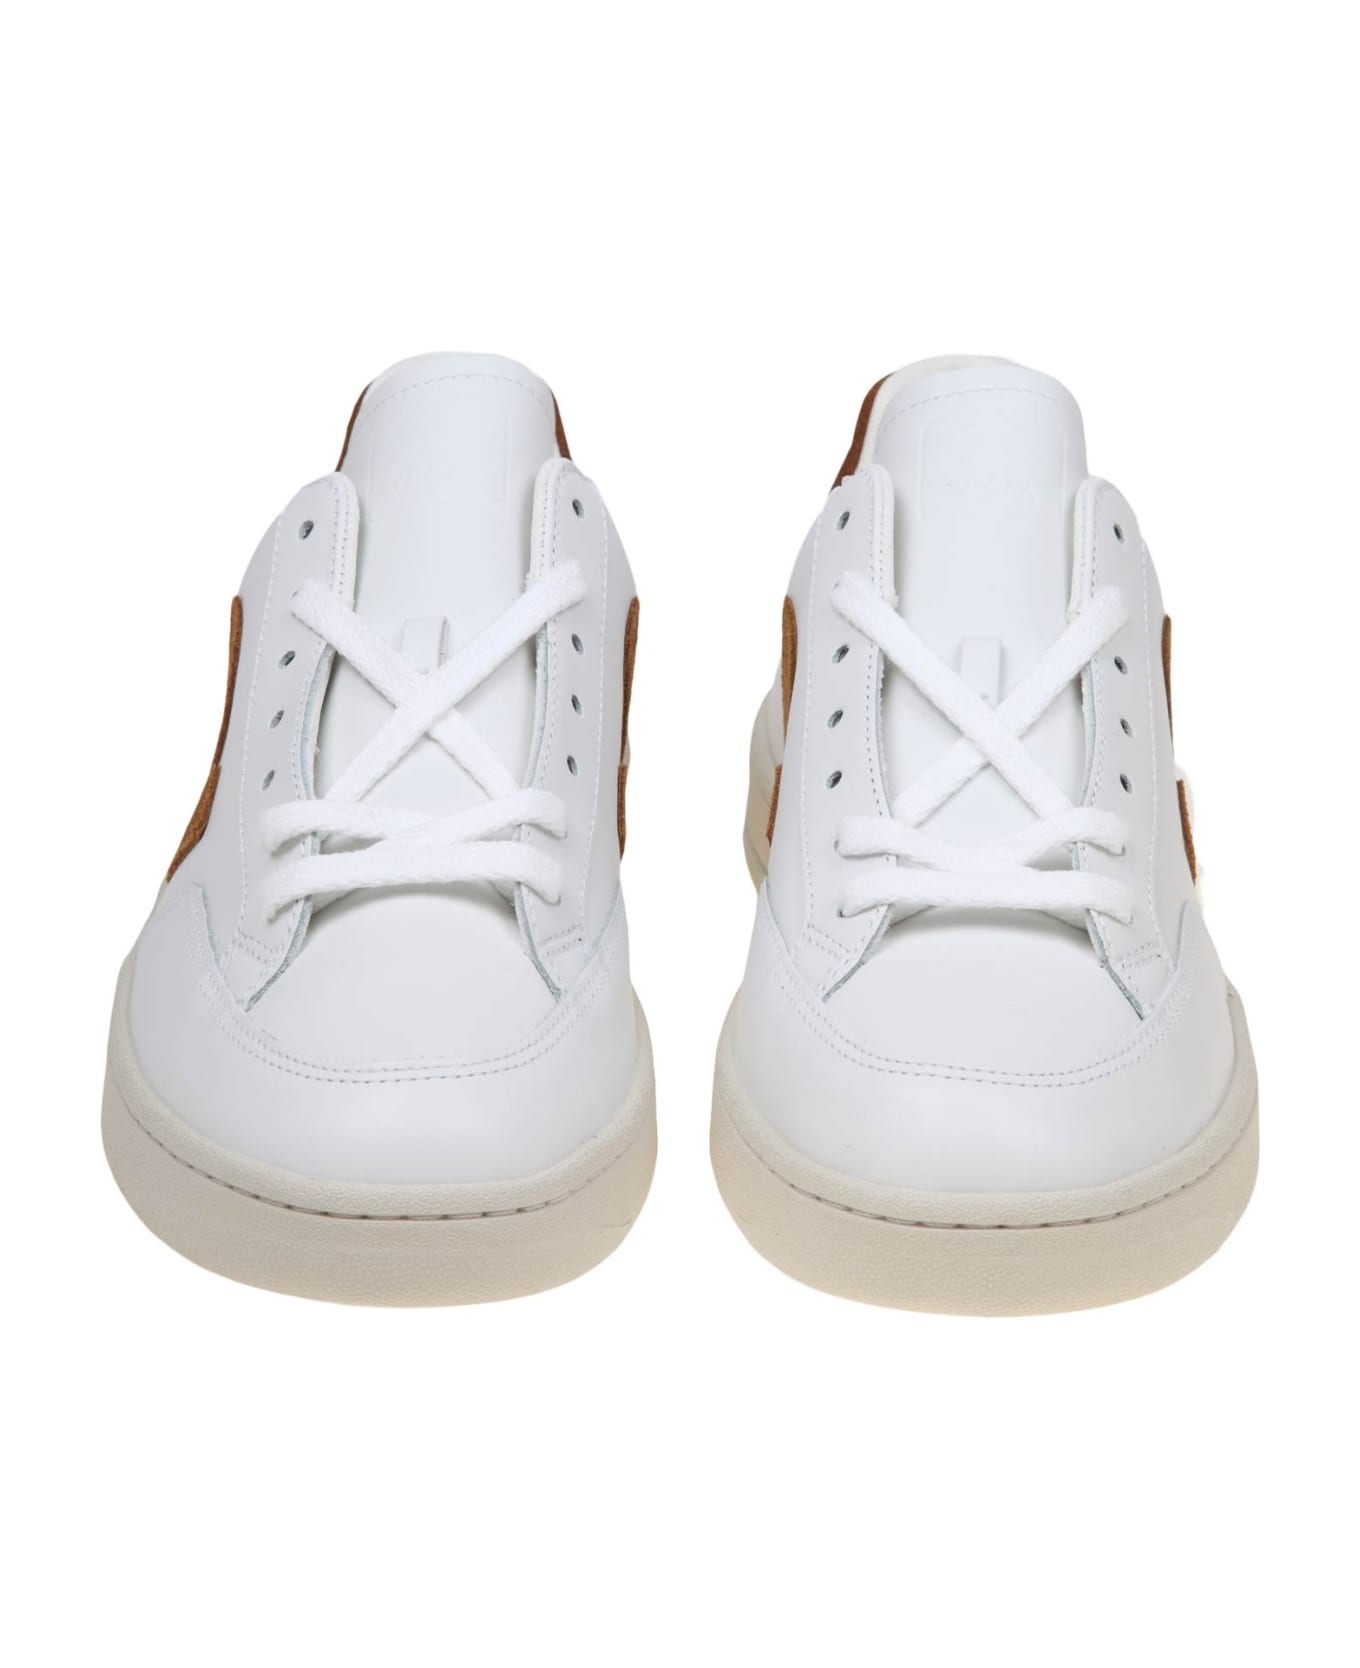 Veja V 90 Sneakers In White And Camel Leather - WHITE/CAMEL